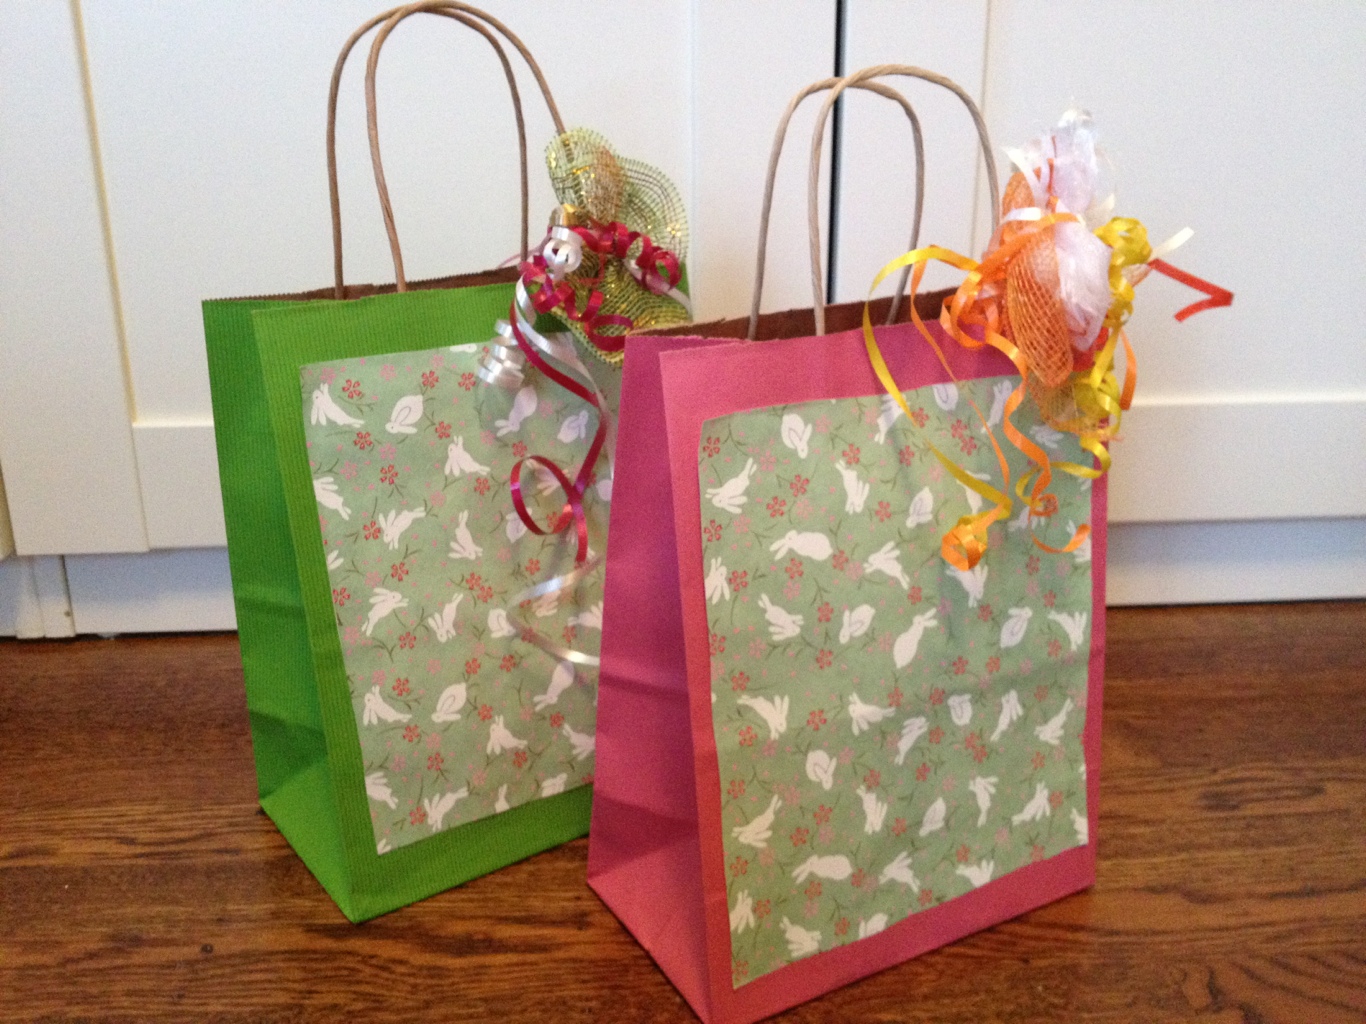 DIY gift bags by Jewels at Home